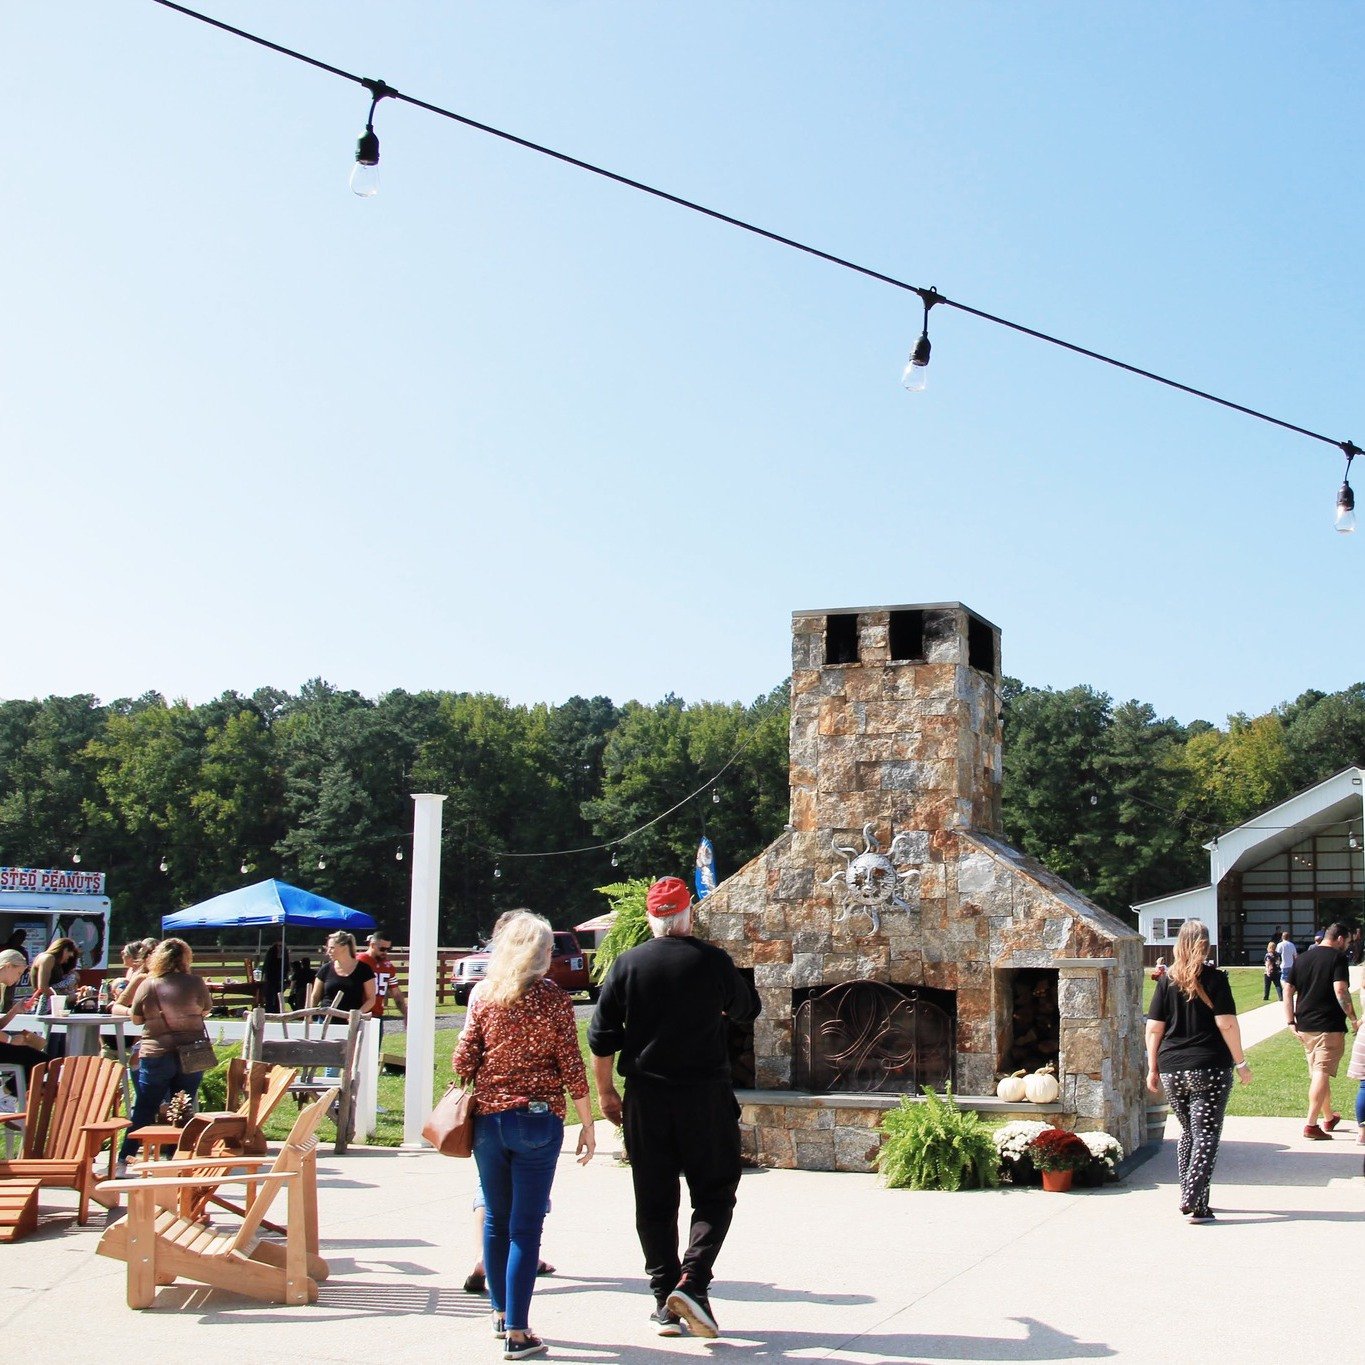 UPCOMING EVENTS at Loblolly Acres

🍴May 18th | DINNER THEATER with Ovation Dinner Theater 

🌿June 1st | OPEN HOUSE featuring Opera Delaware, Live Music by Sean Reilly, On-site Wood Chainsaw Carvers + Live Auction - a free event! 

🍓June 7th | FARM